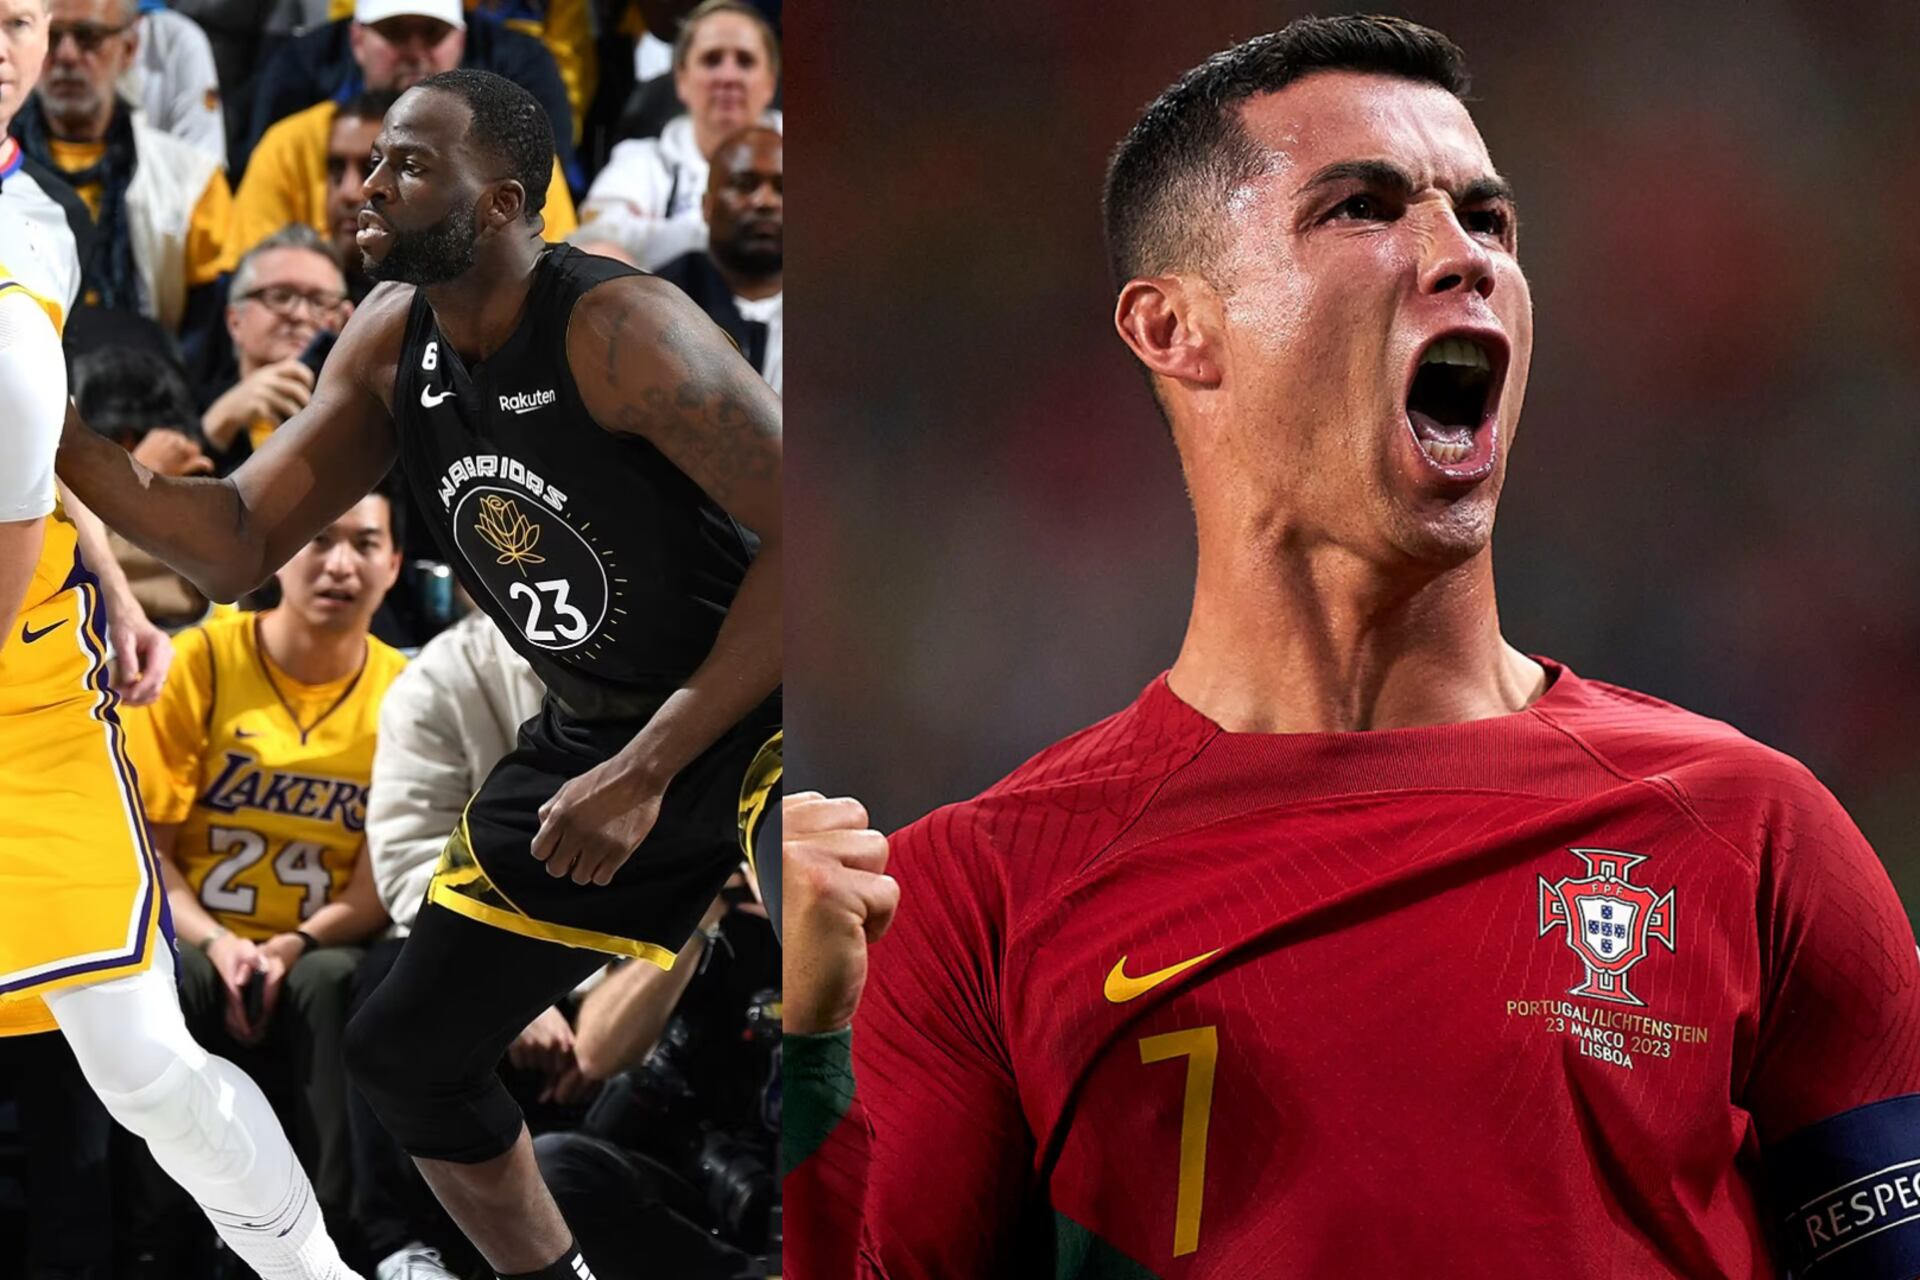 The NBA team who is inspired by Cristiano Ronaldo and copies him